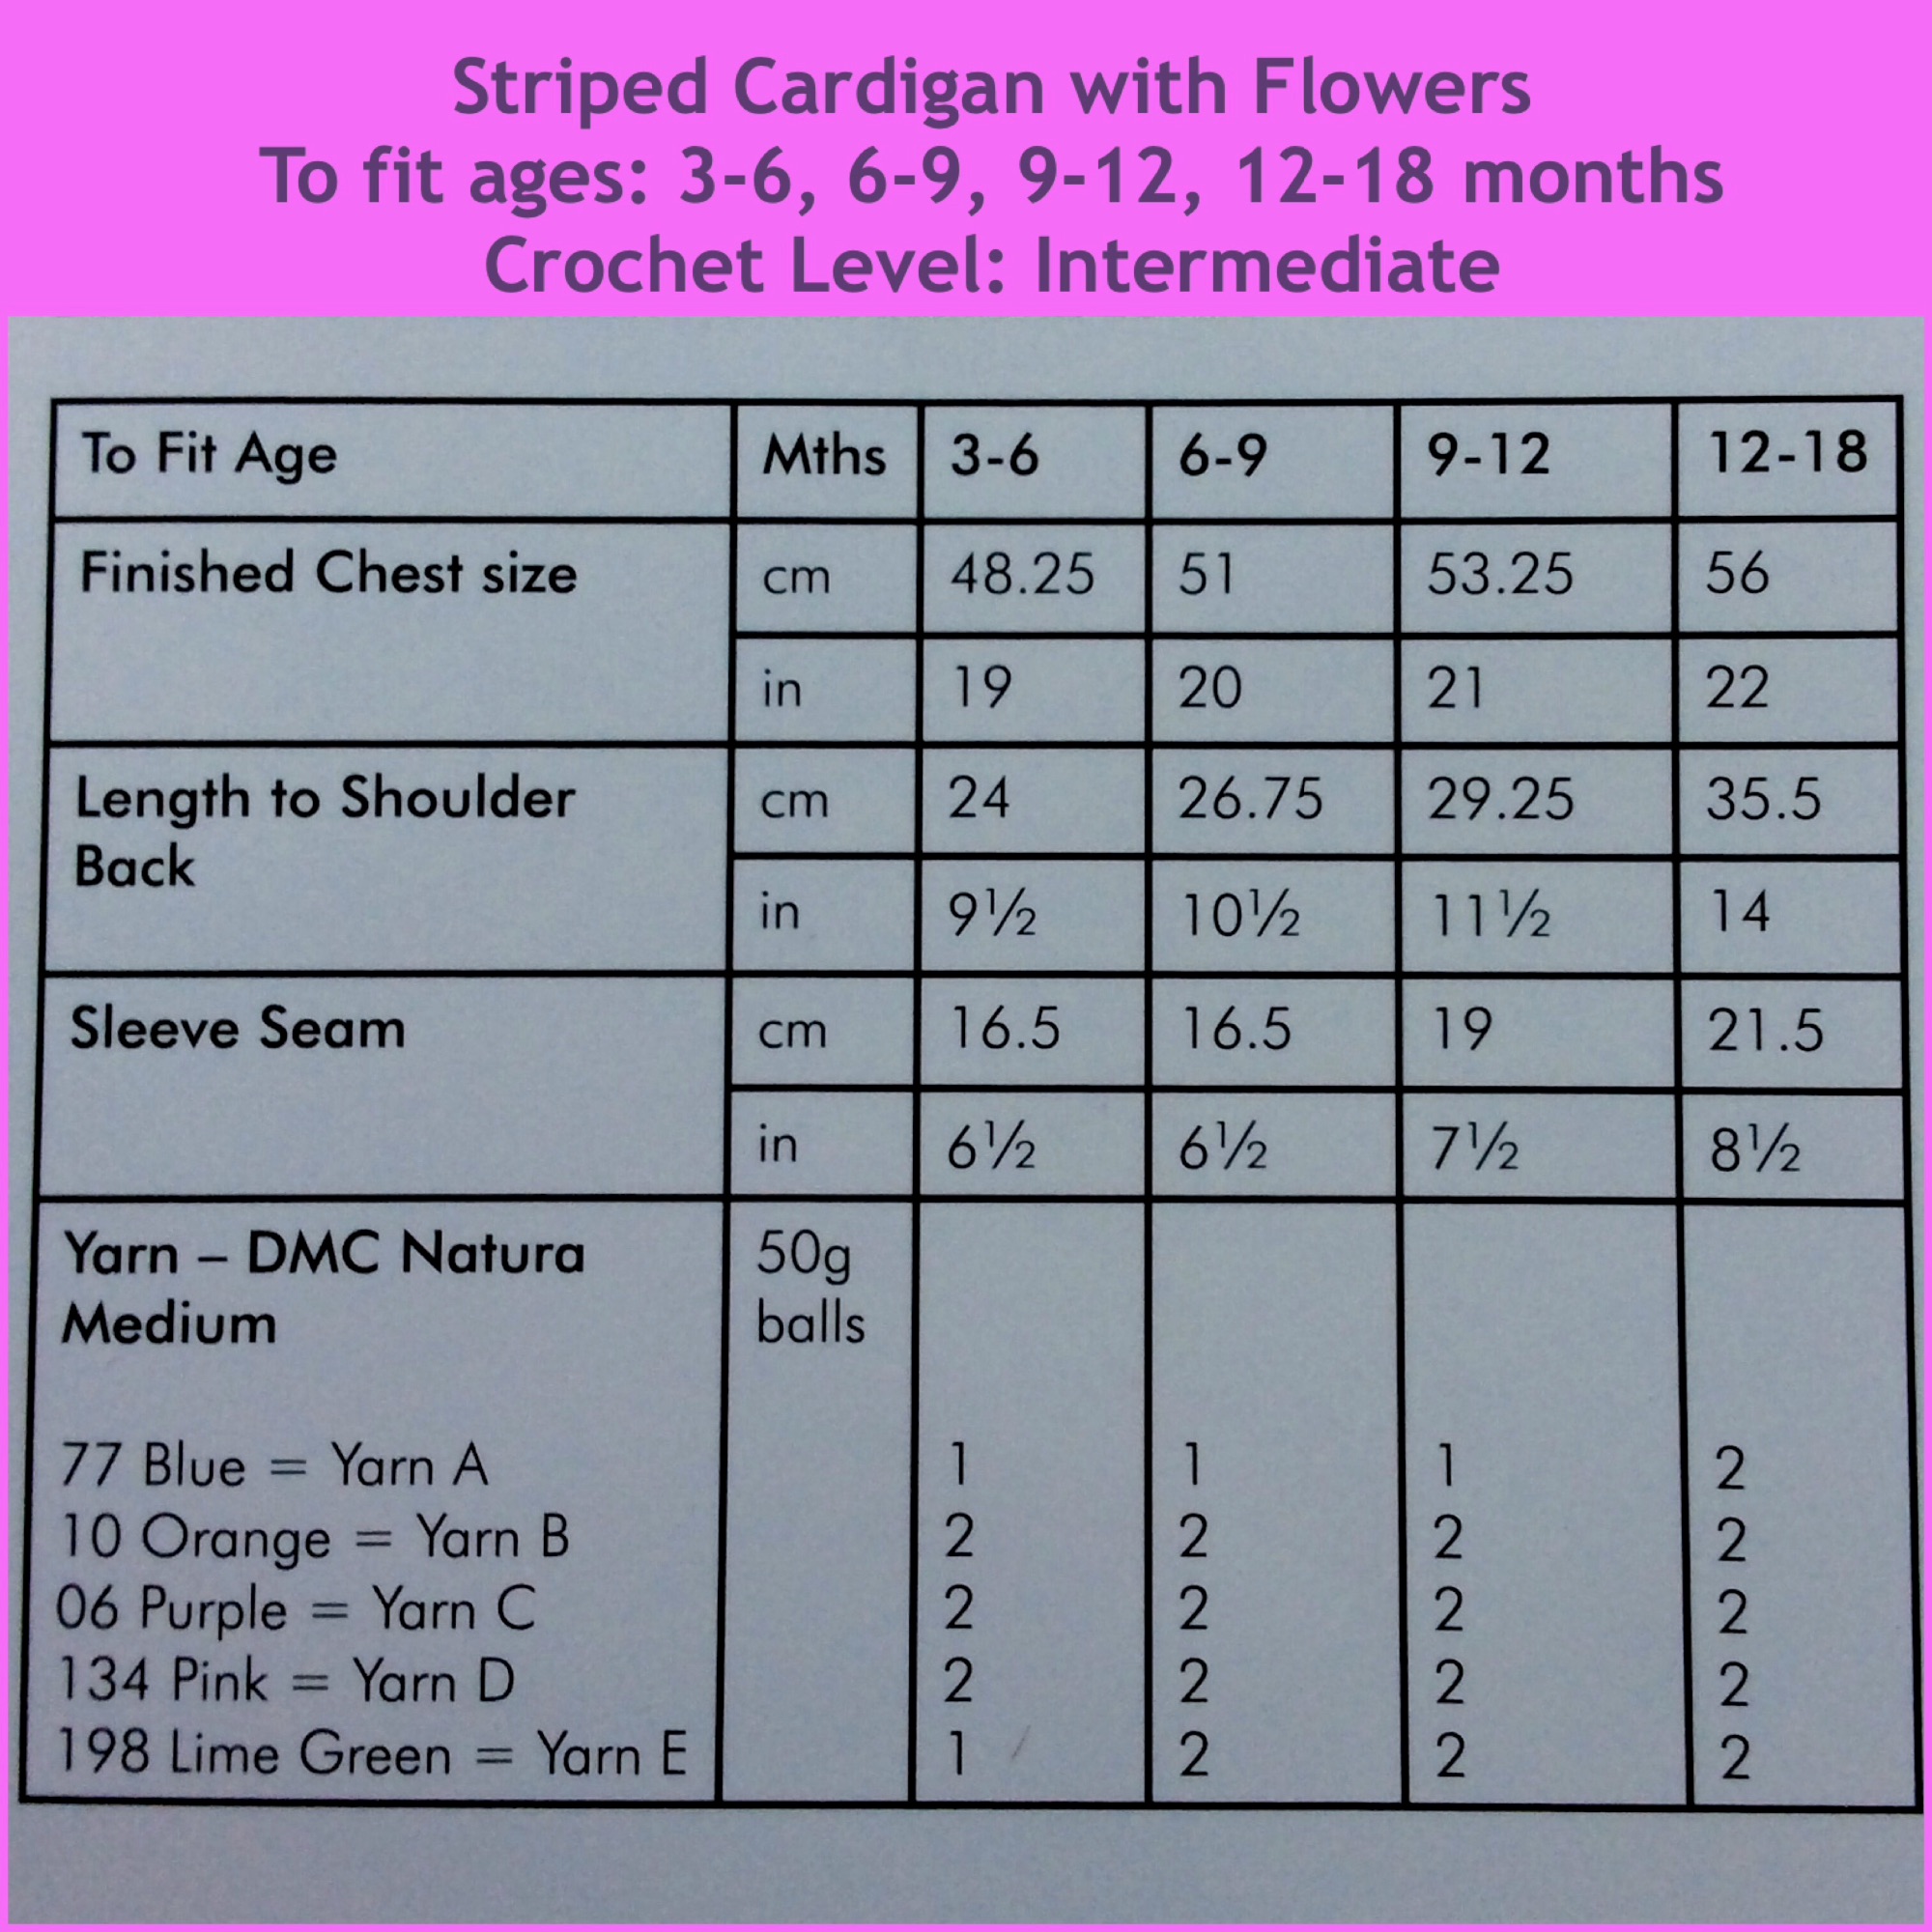 Striped cardigan with flowers fit ages chart